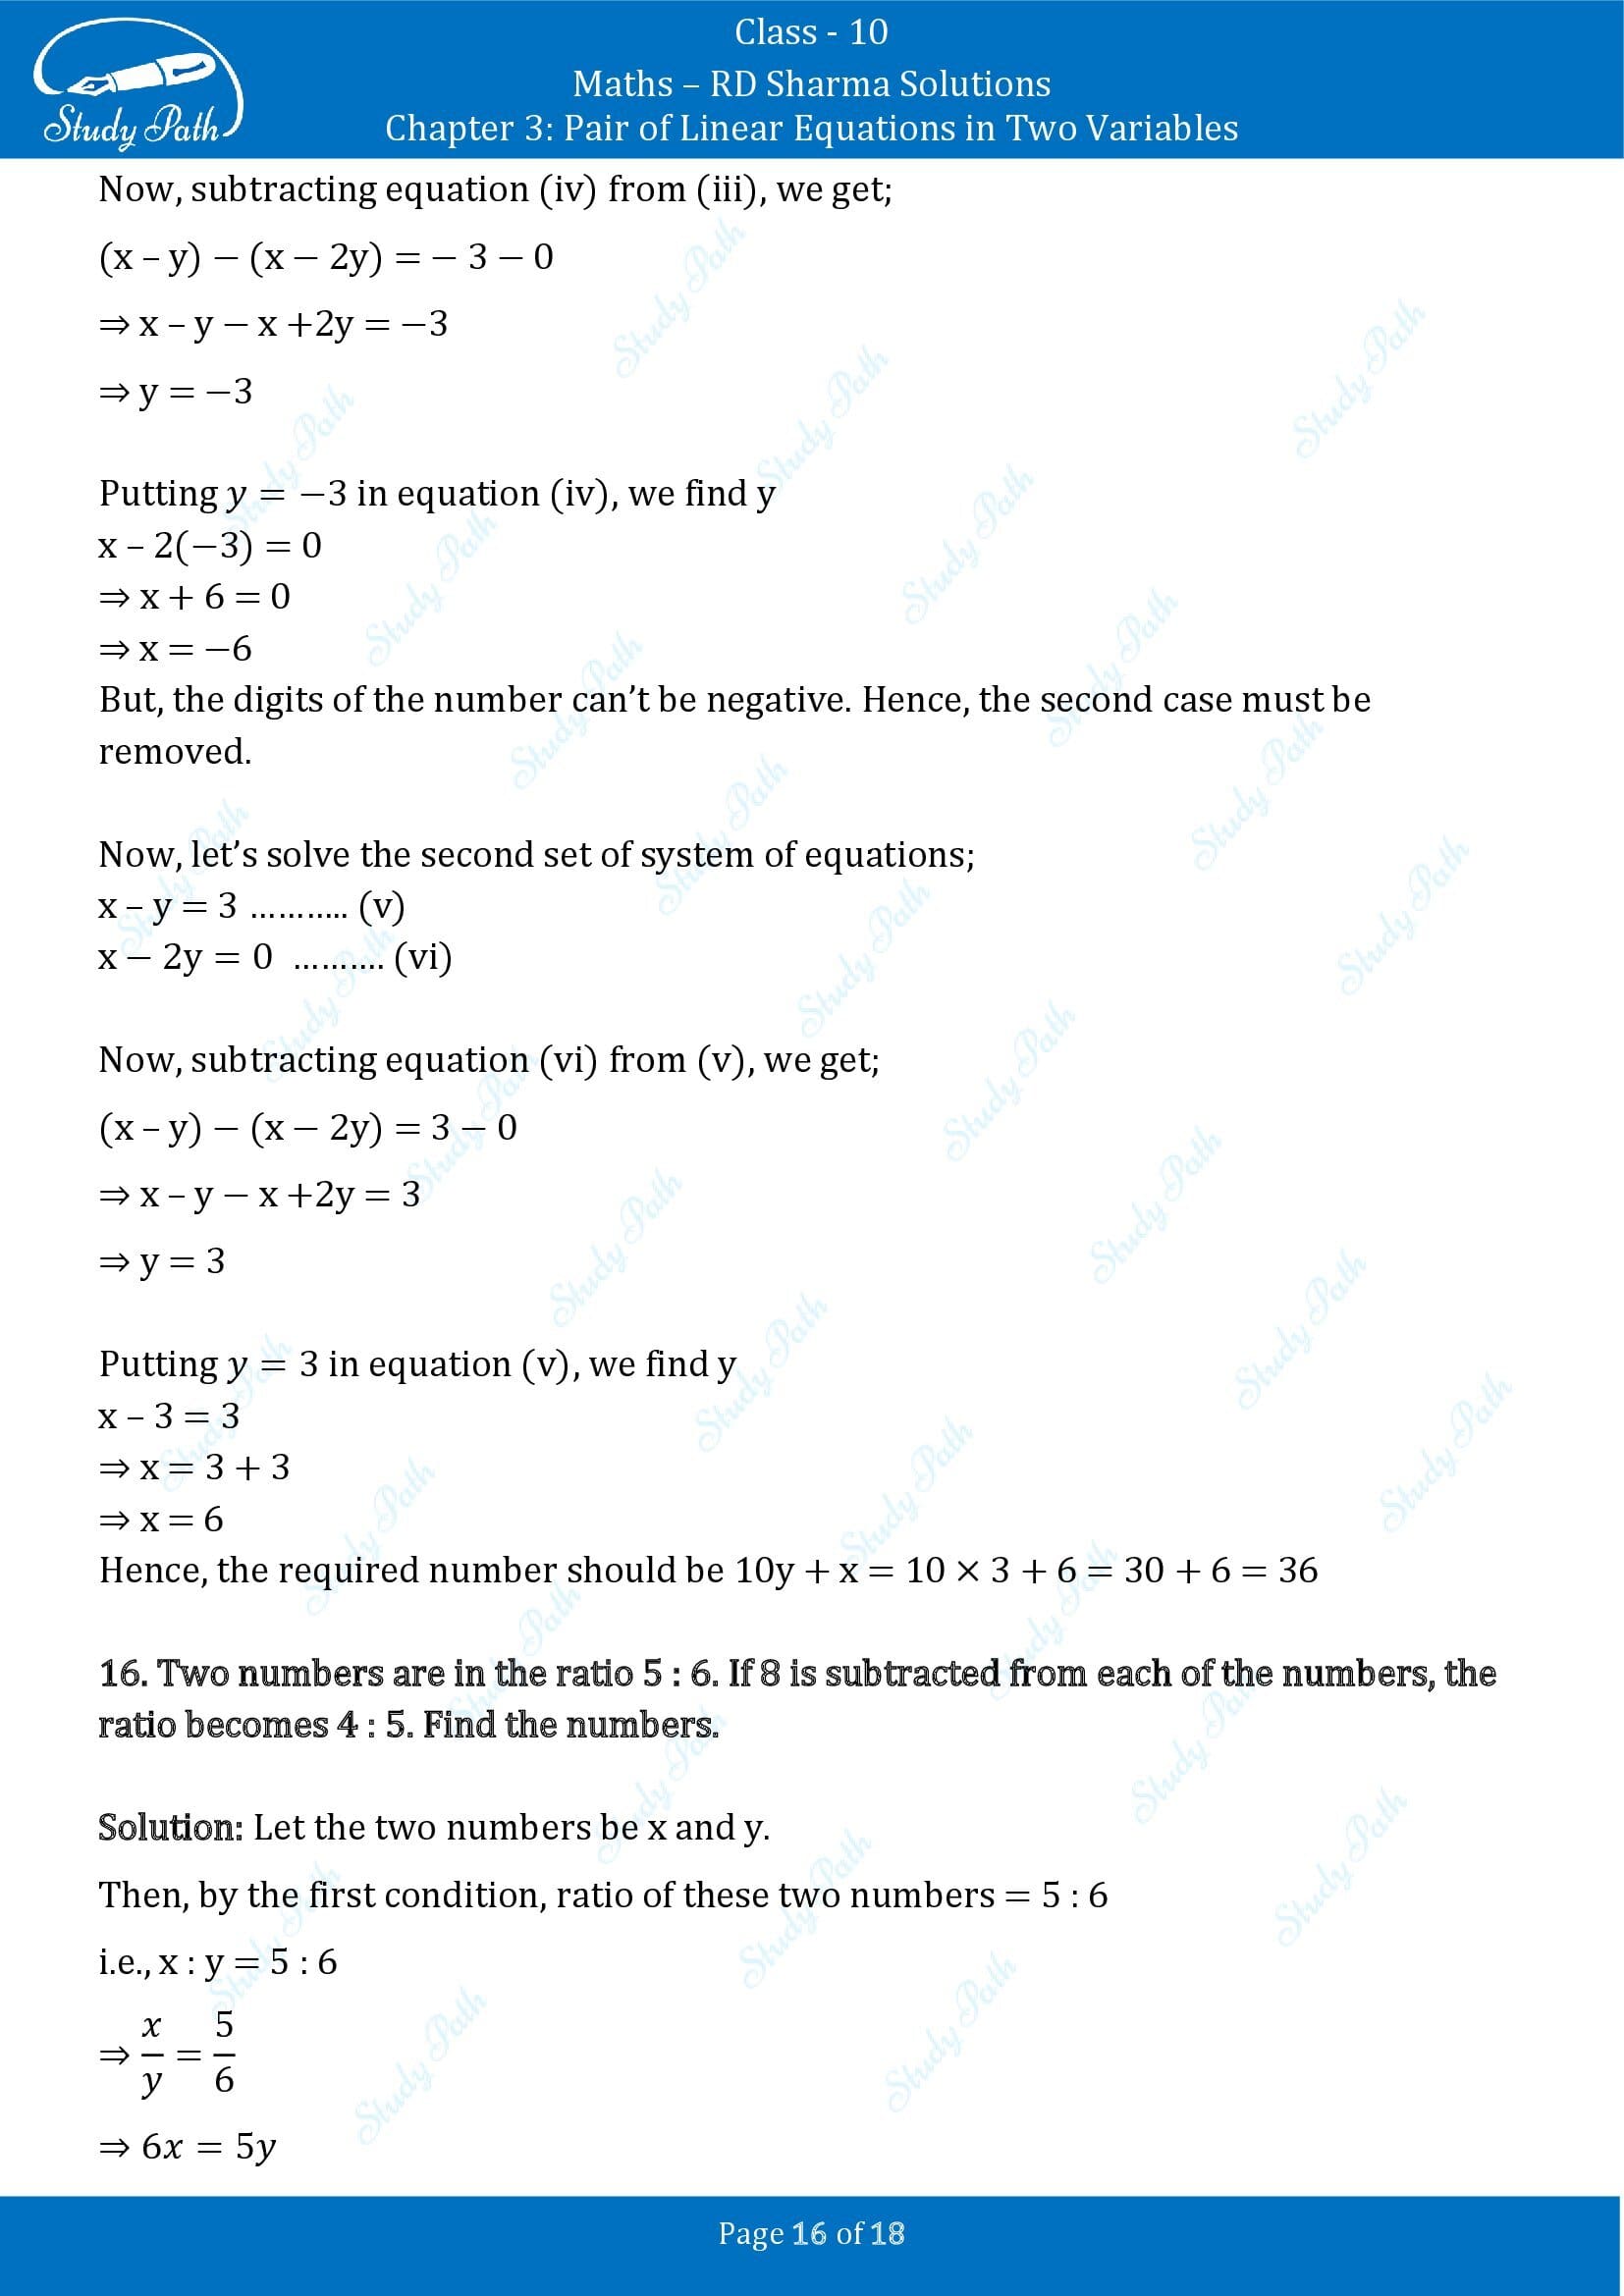 RD Sharma Solutions Class 10 Chapter 3 Pair of Linear Equations in Two Variables Exercise 3.7 00016